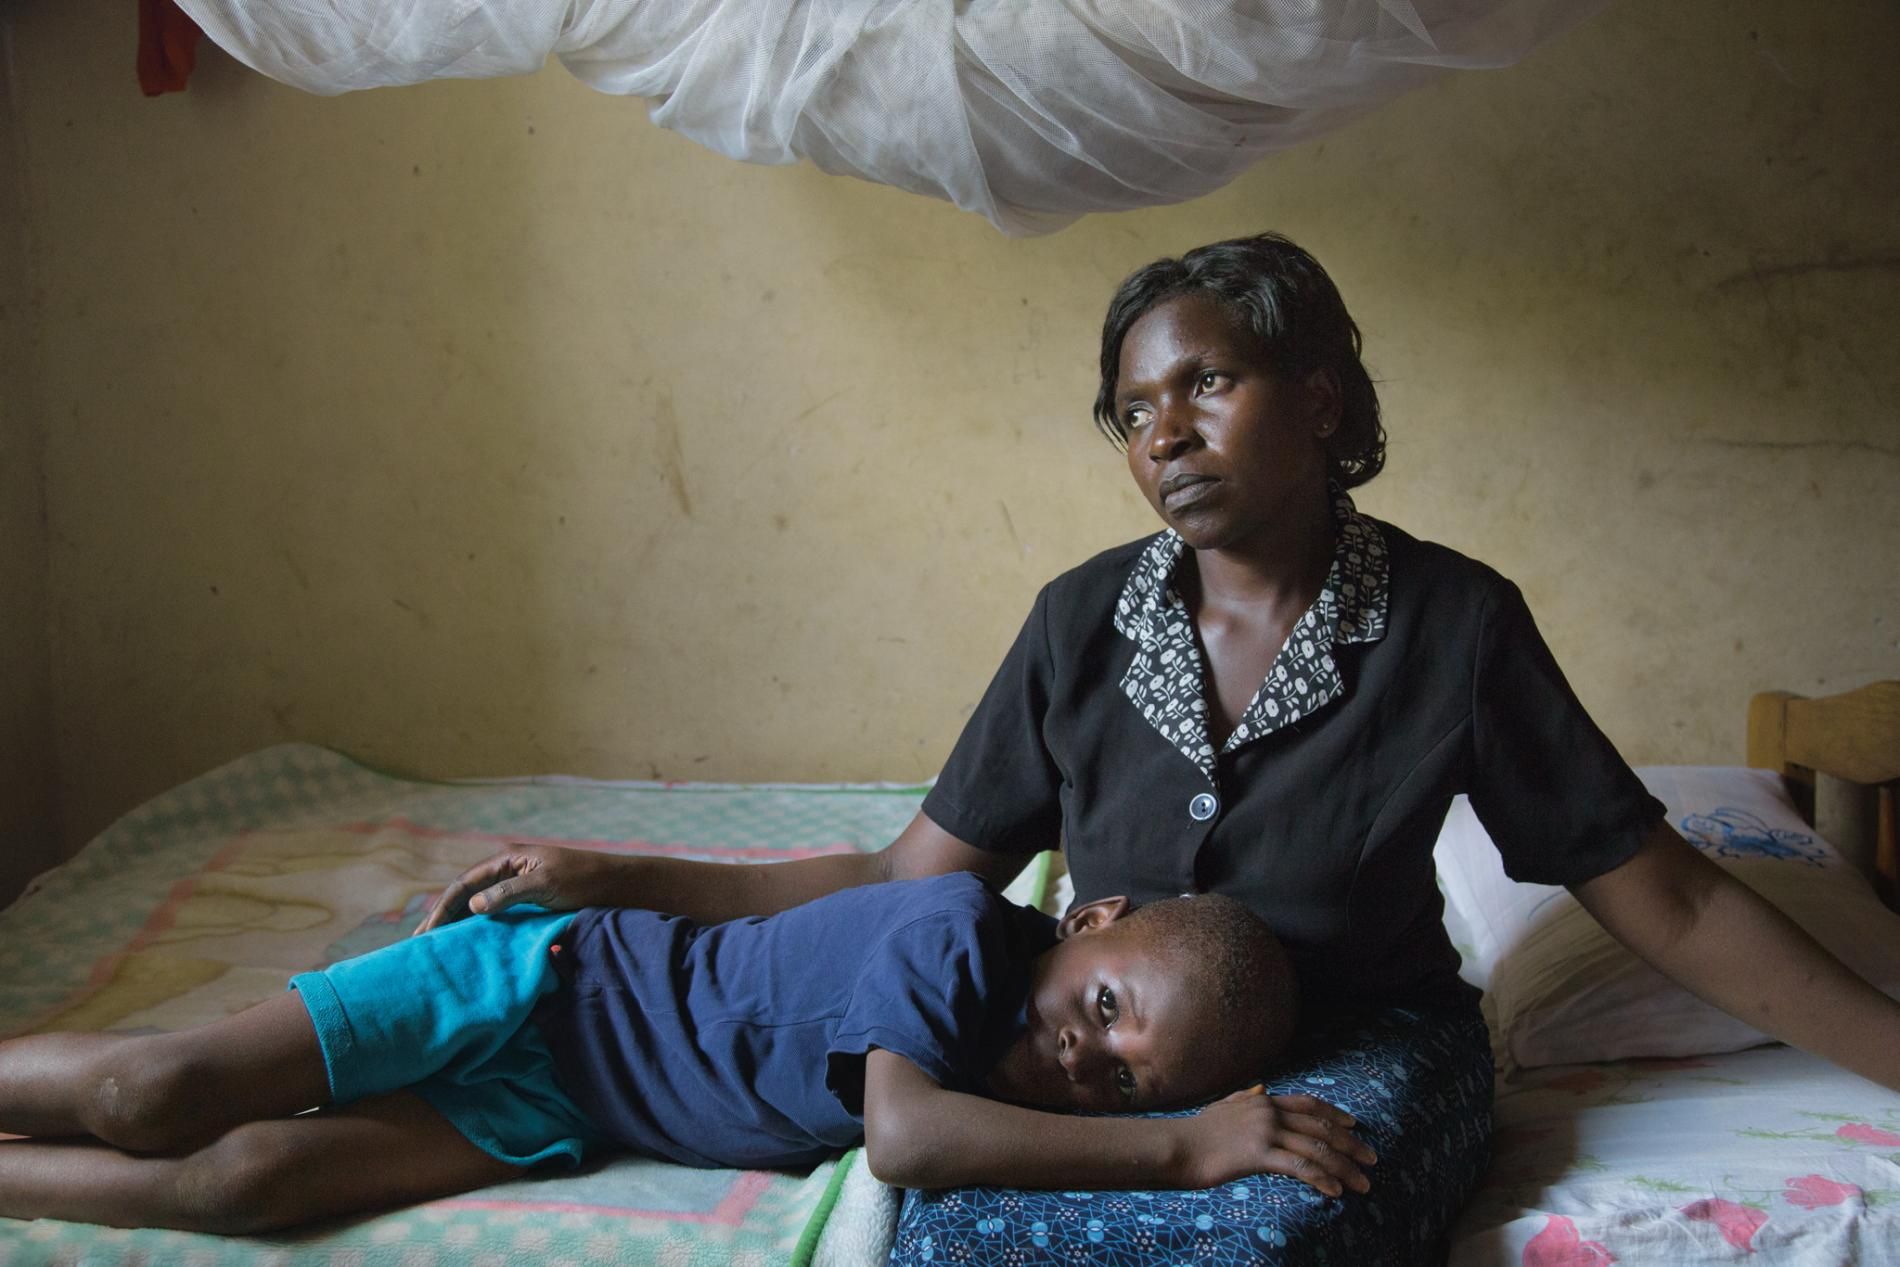 Christine Namatovu and her son Andrew bring solace to each other in the house Namatovu’s in-laws tried to seize when her husband died. Pushing widows off their property is common practice in this region; Namatovu, with the help of lawyers, fought back. Image by Amy Toensing. Uganda, 2016.